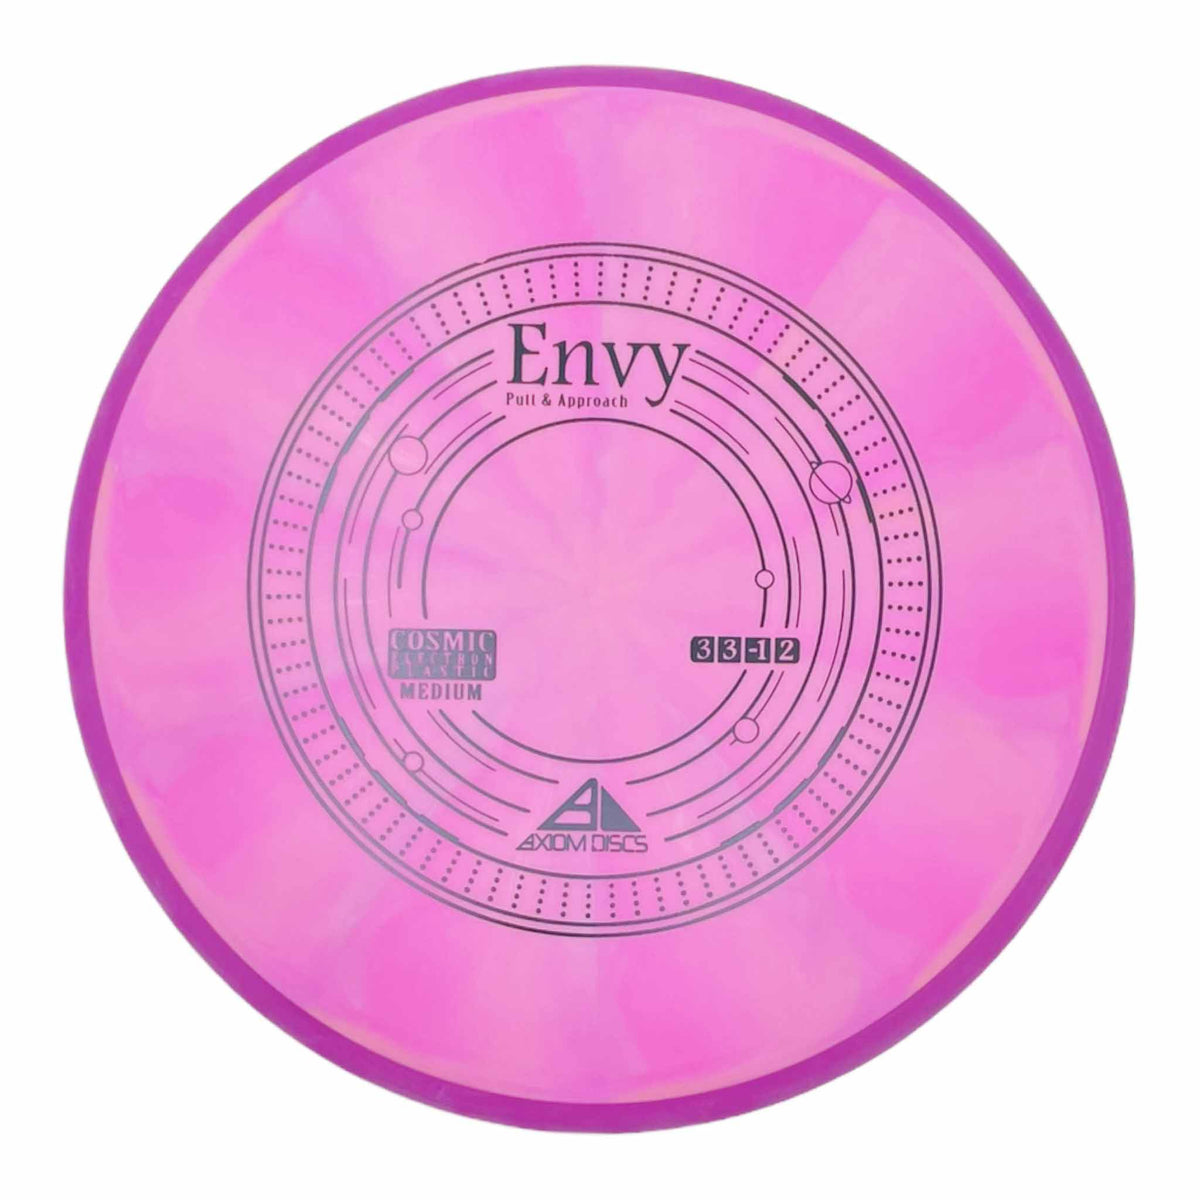 Axiom Discs Cosmic Electron Medium Envy putter and approach - Pink